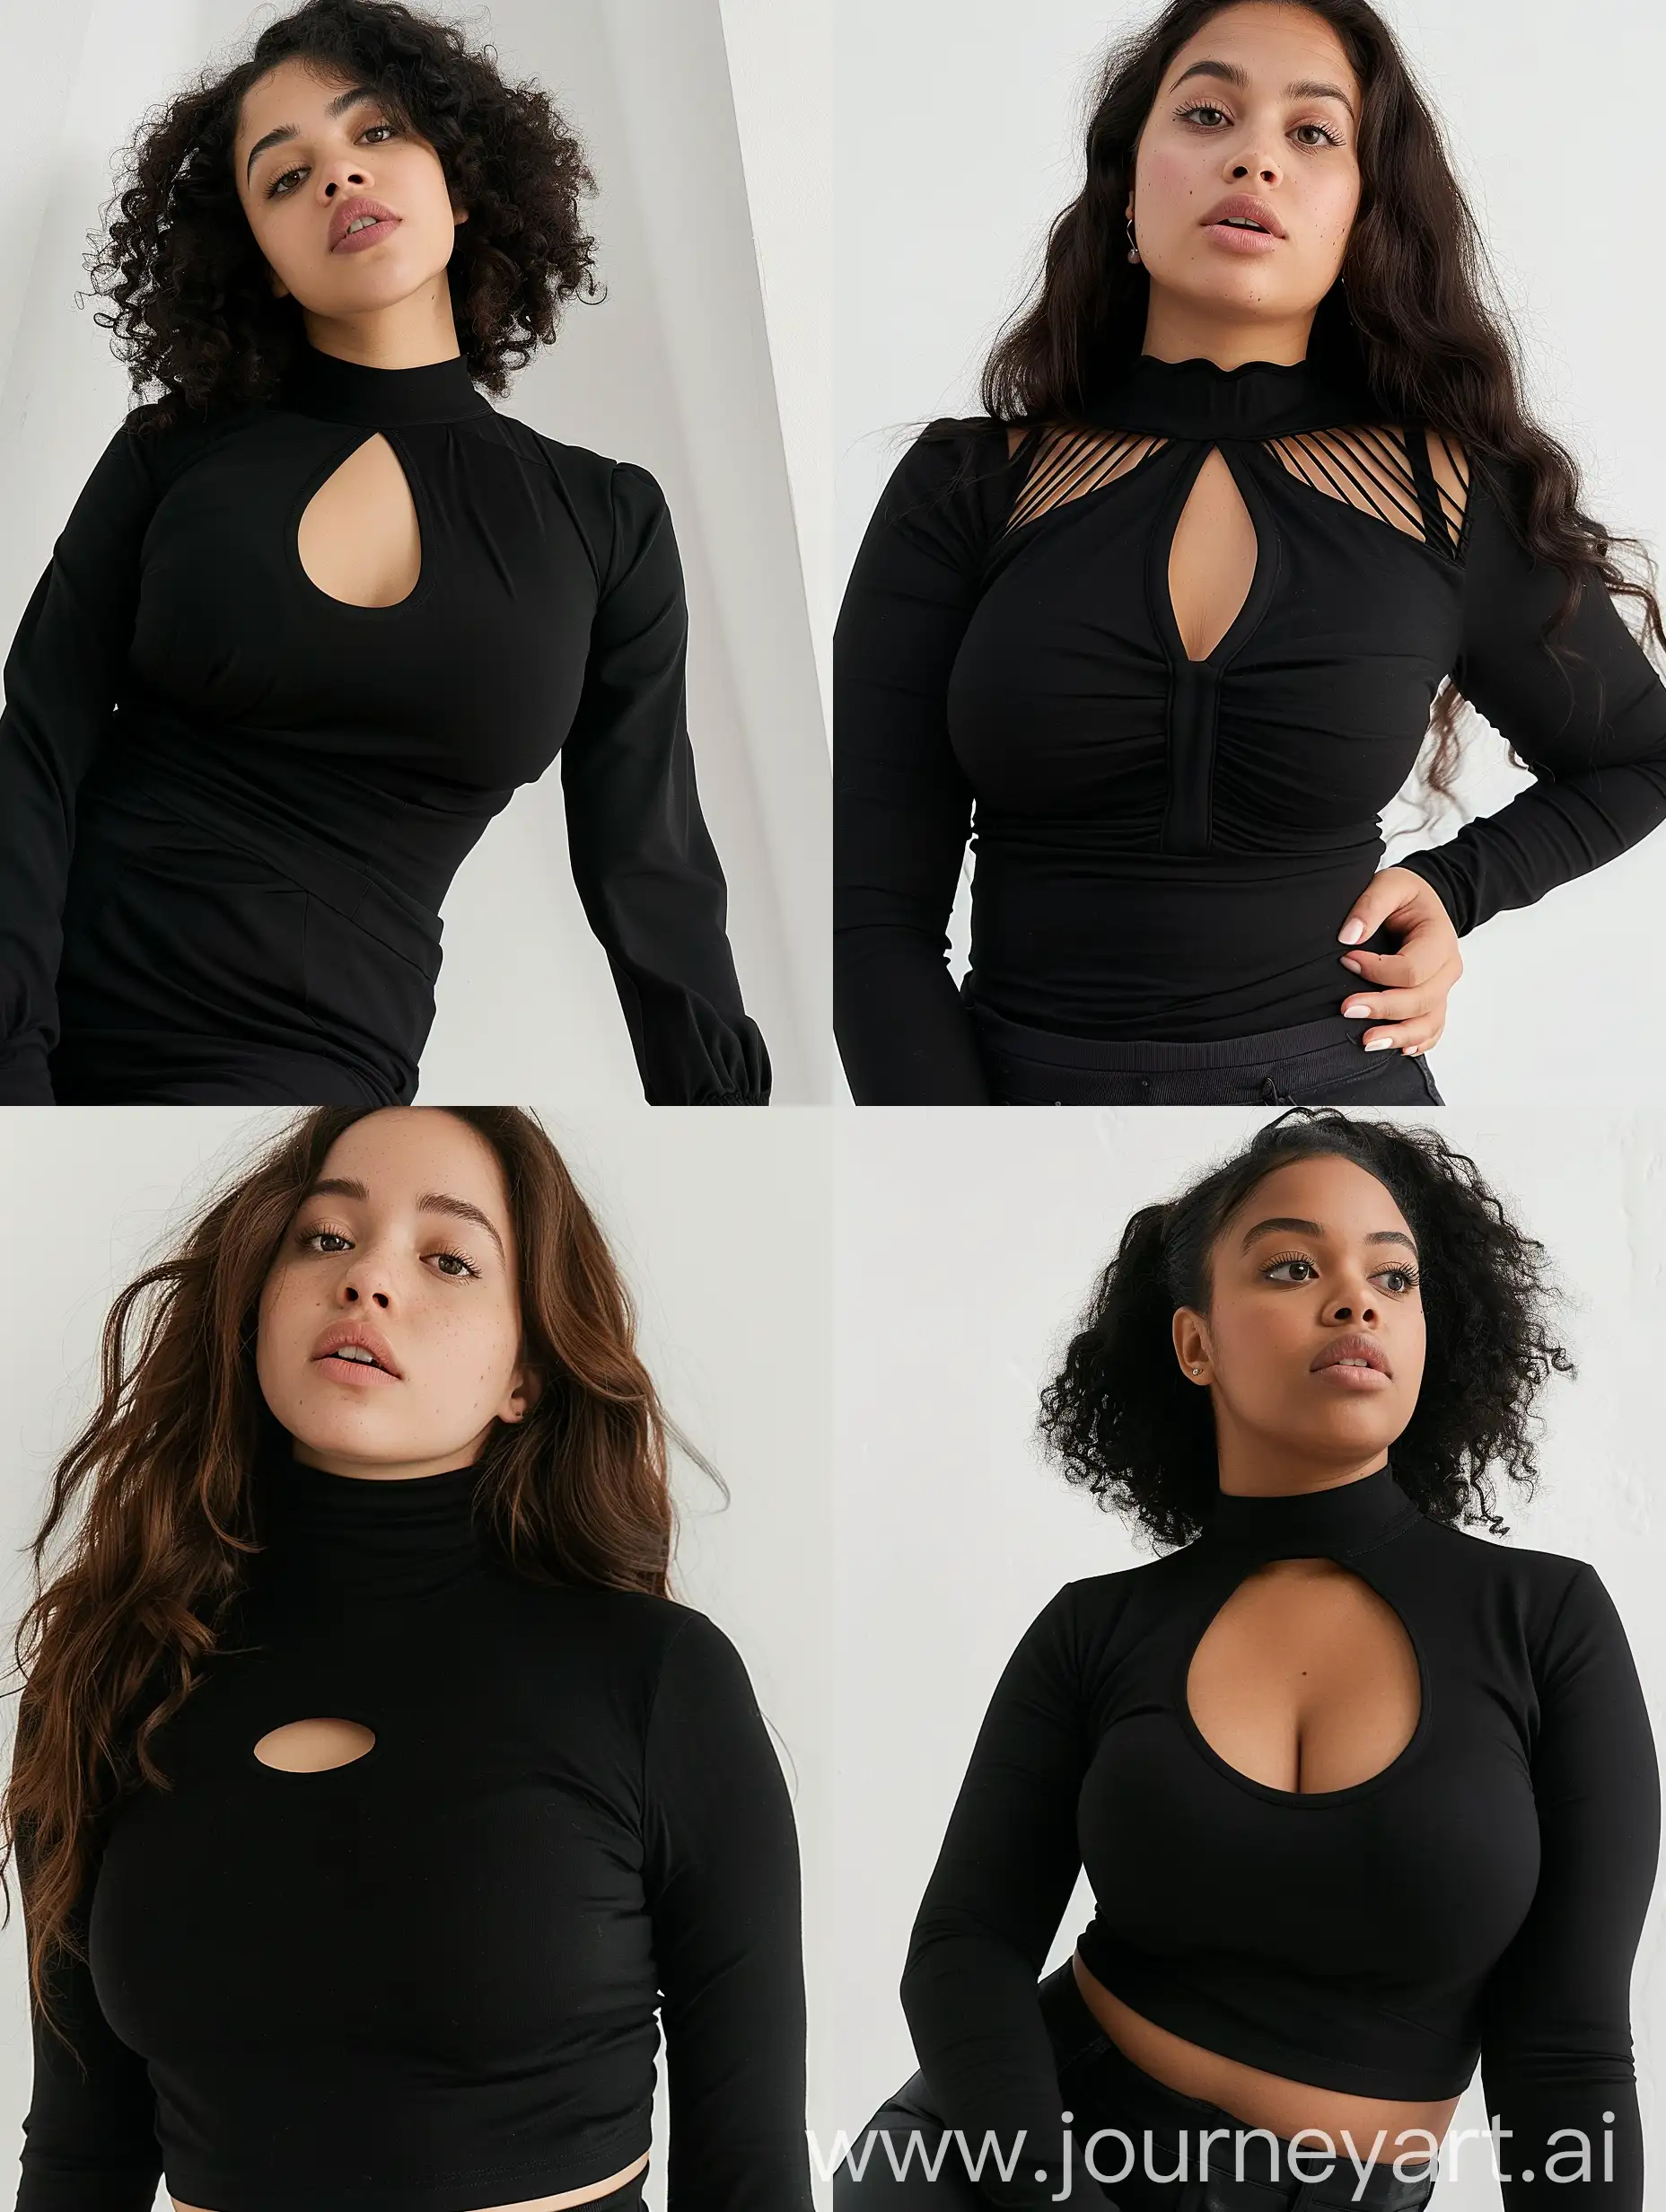 Plus-Size-Model-in-Black-Long-Sleeve-Cutout-Top-on-White-Background